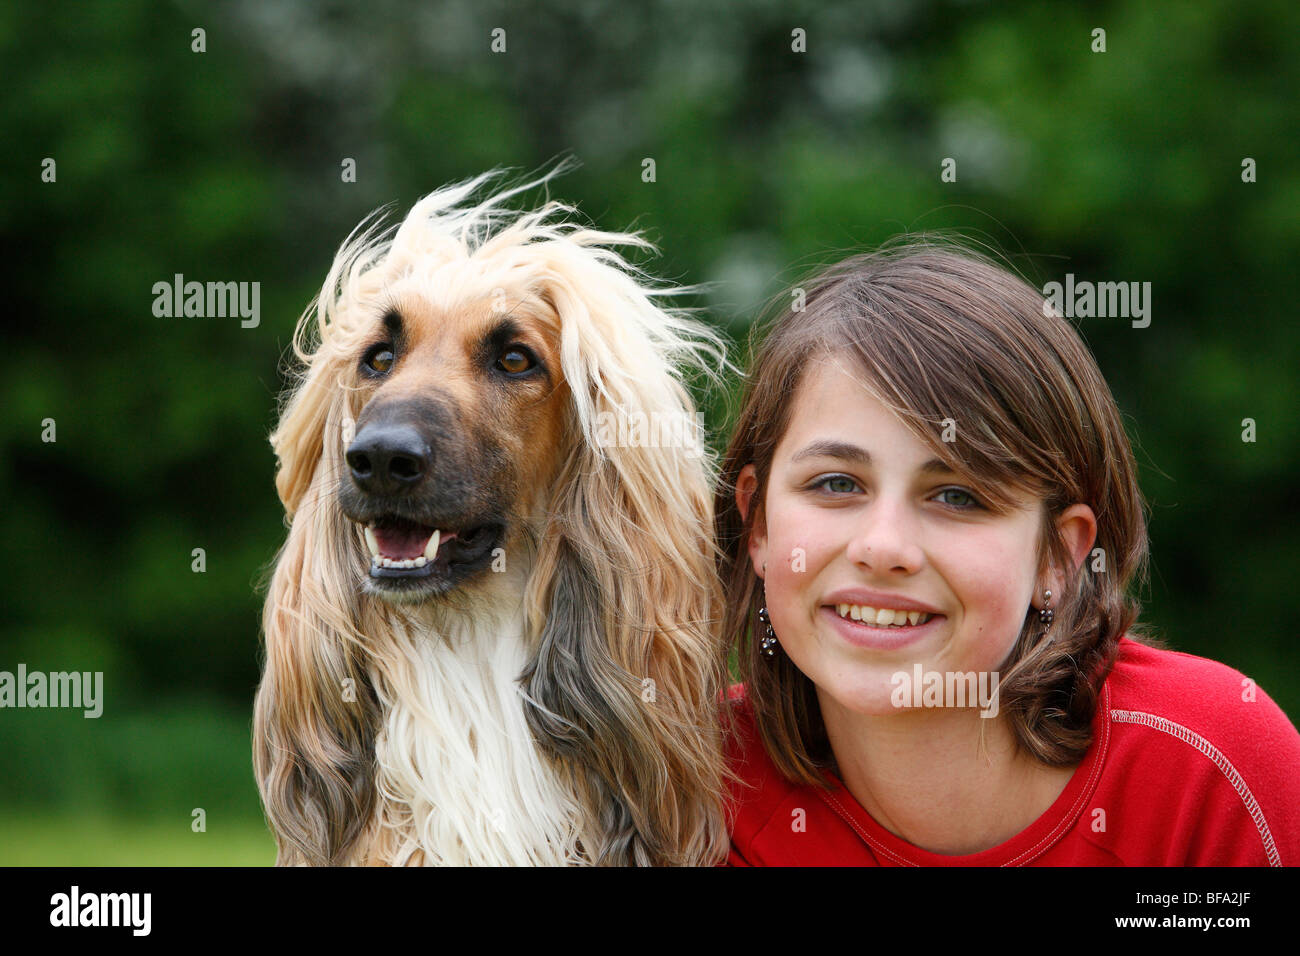 Afghanistan Hound, Afghan Hound (Canis lupus f. familiaris), girl embracing a dog Stock Photo